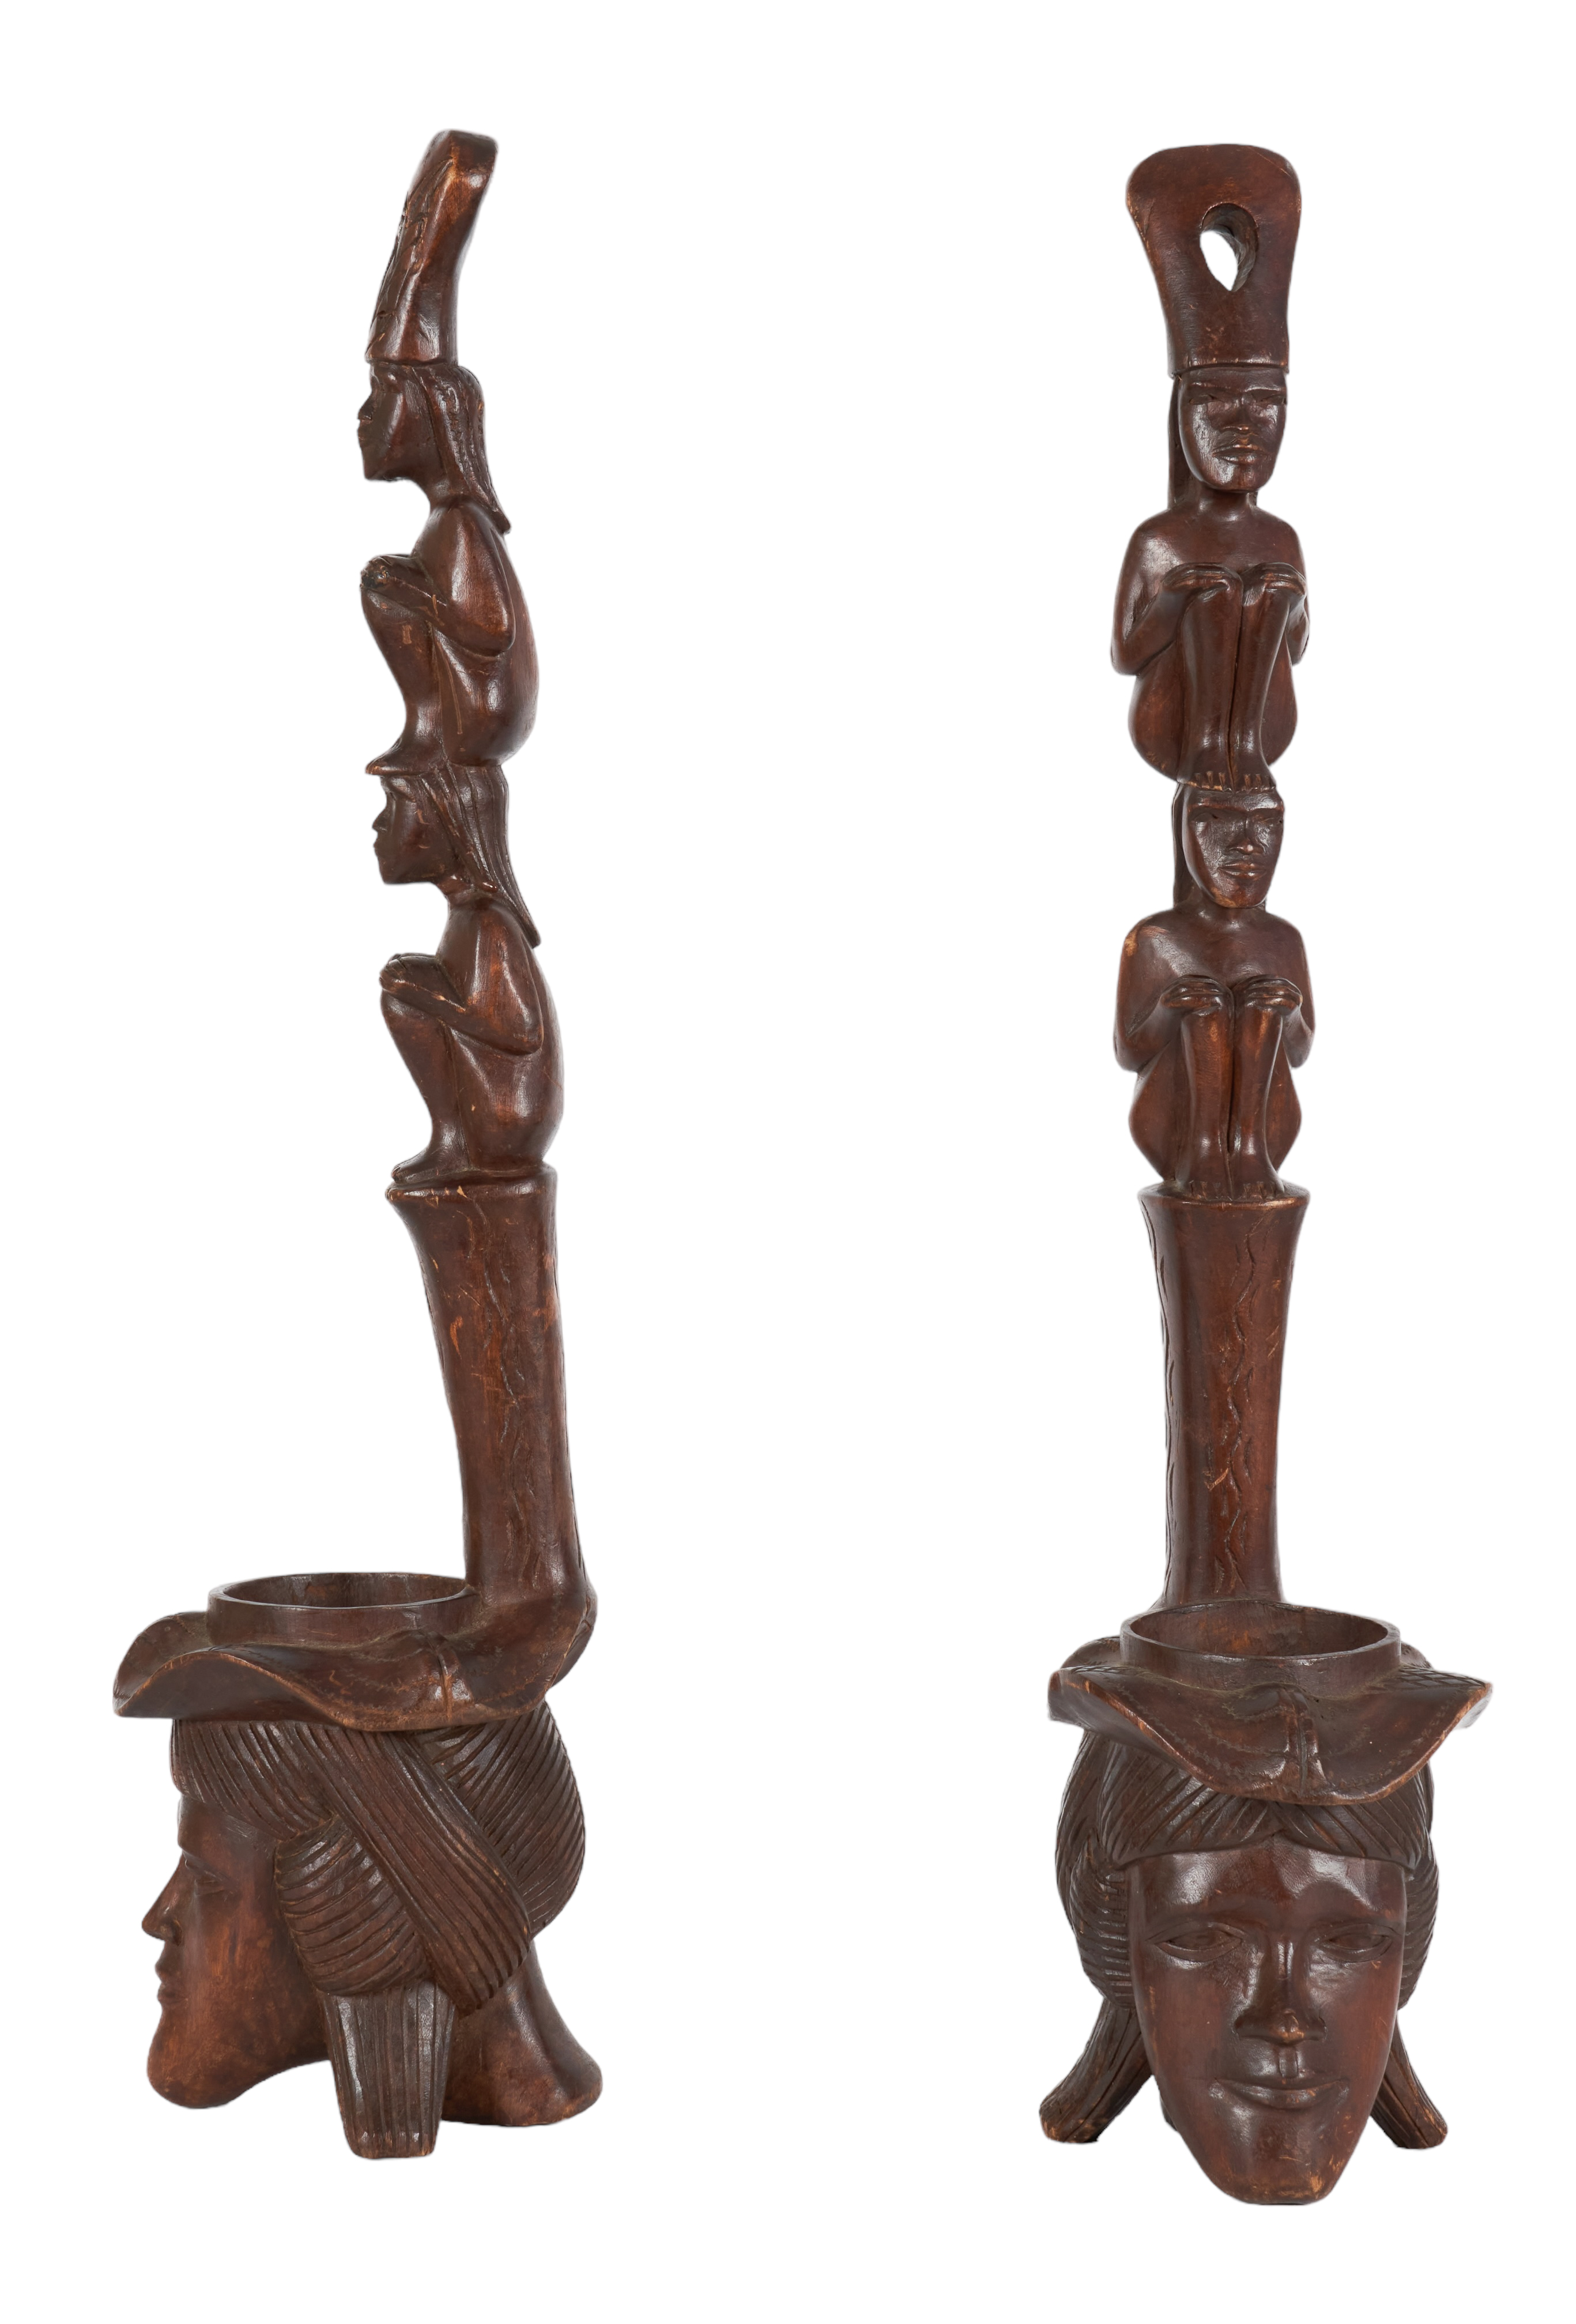 Pair of African carved wood figural